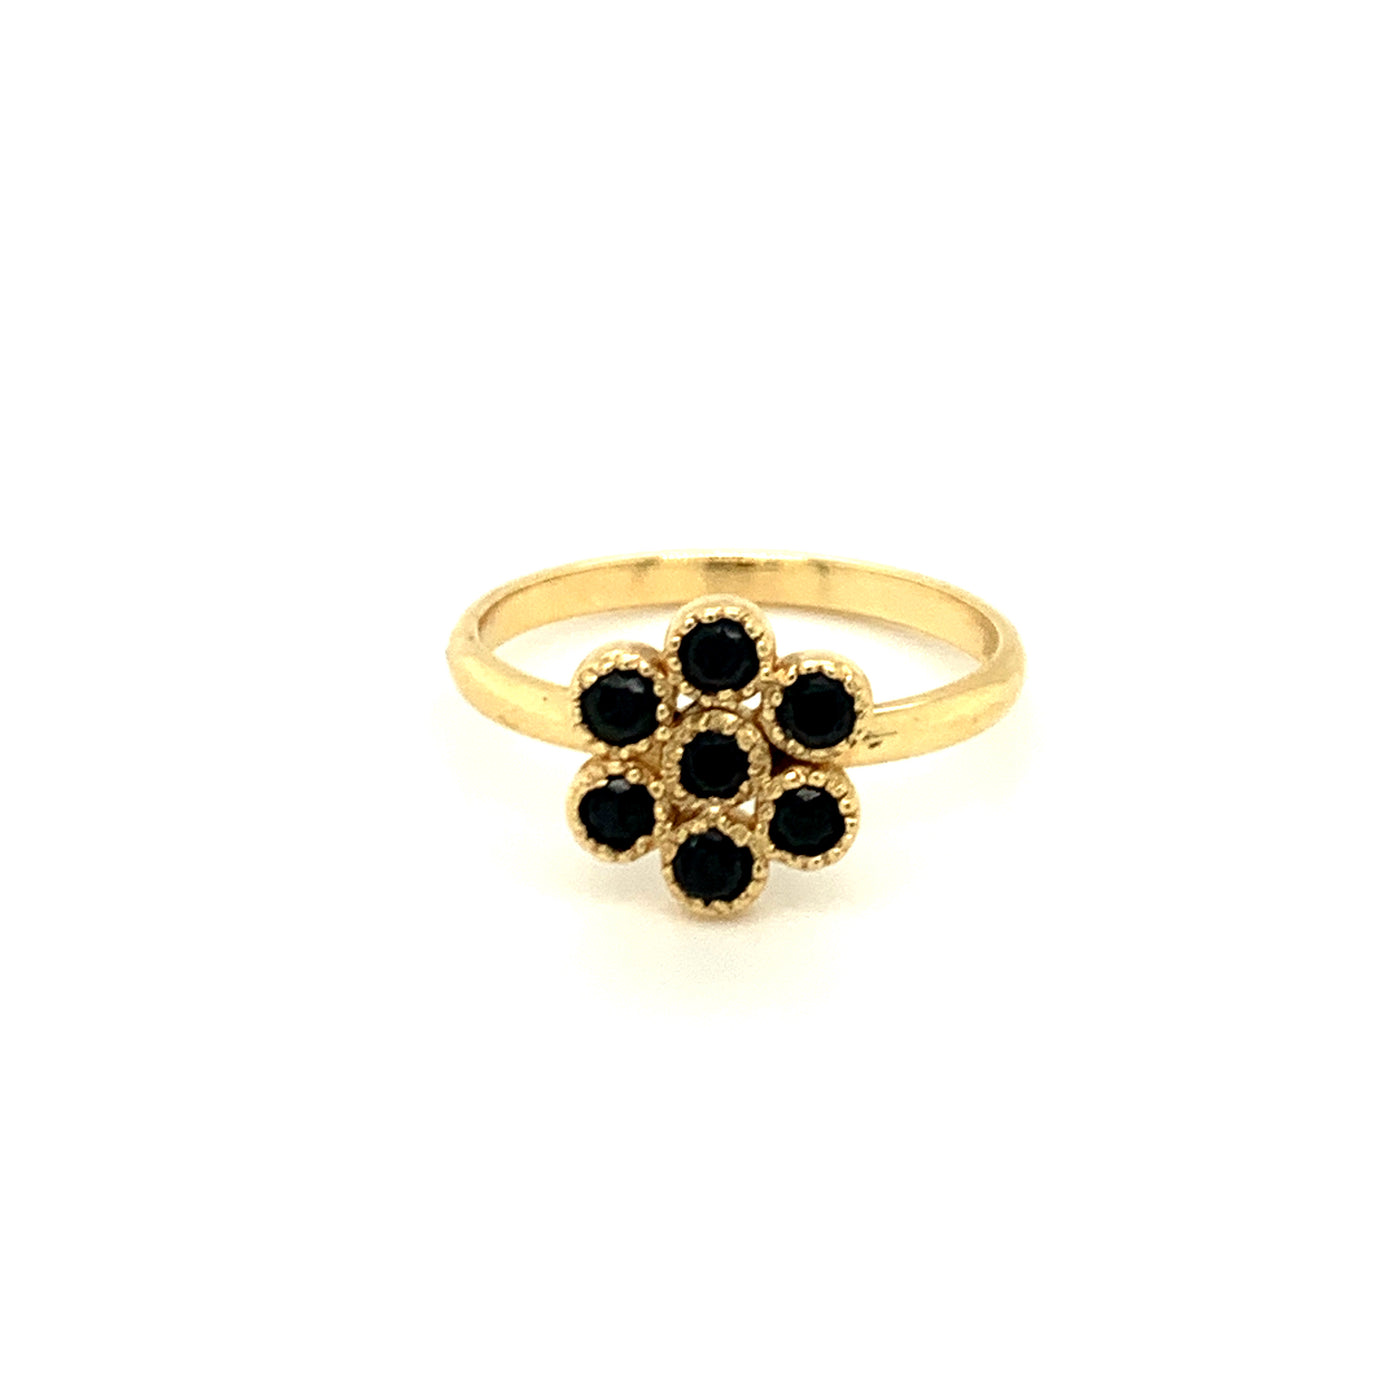 Water Lily Ring with Black Spinel - Lauren Sigman Collection